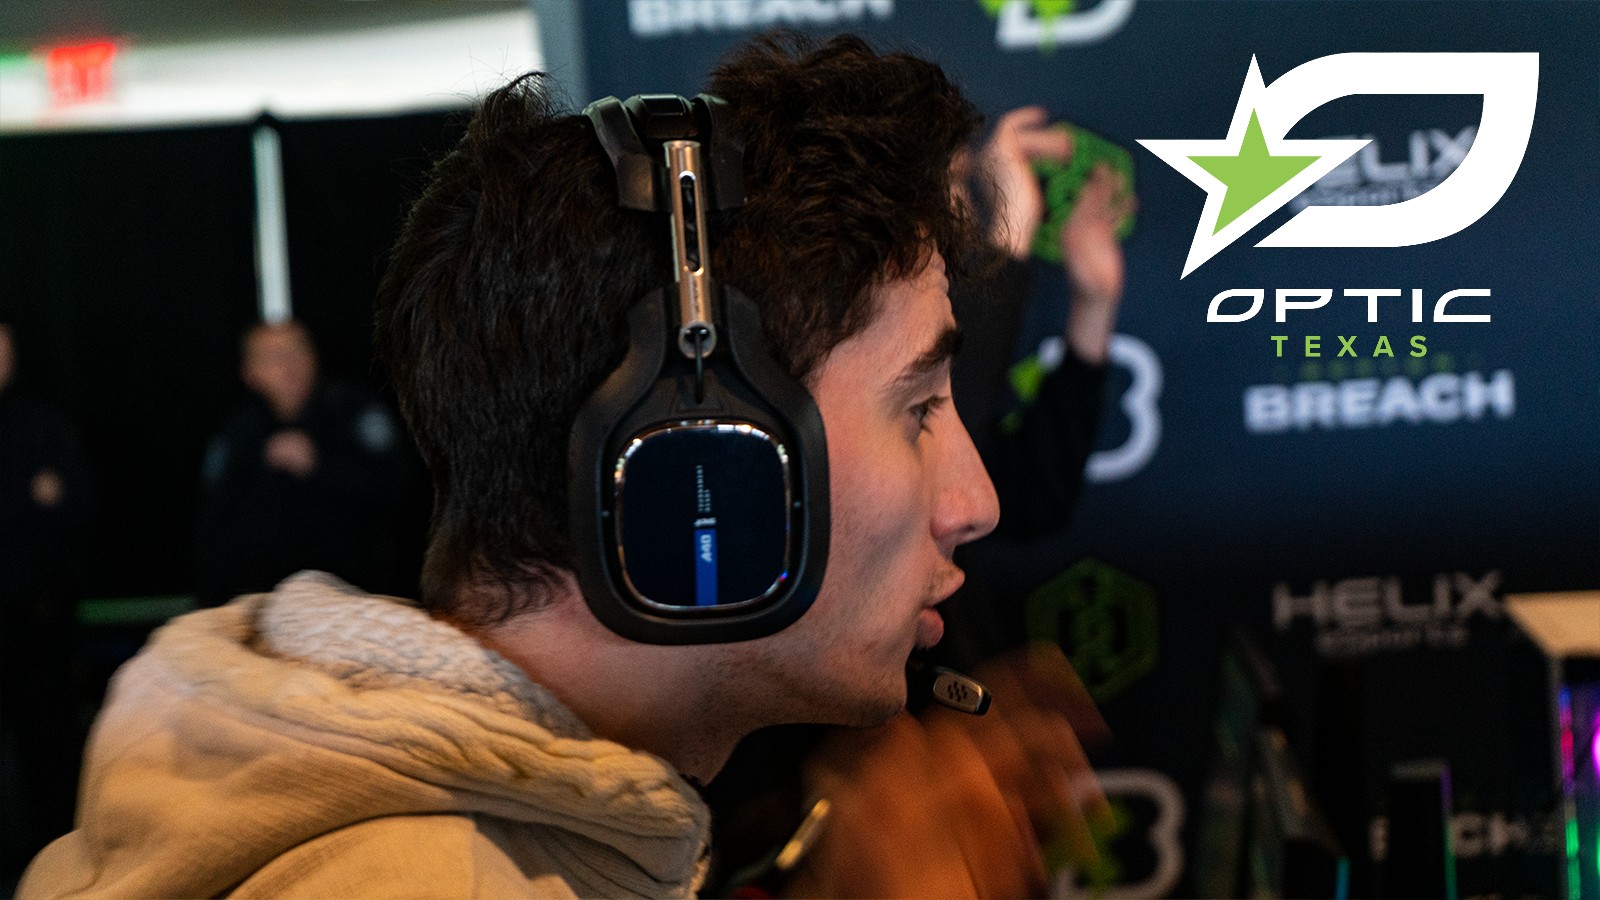 OpTic Texas release Ghosty and Huke from CDL roster - Dexerto